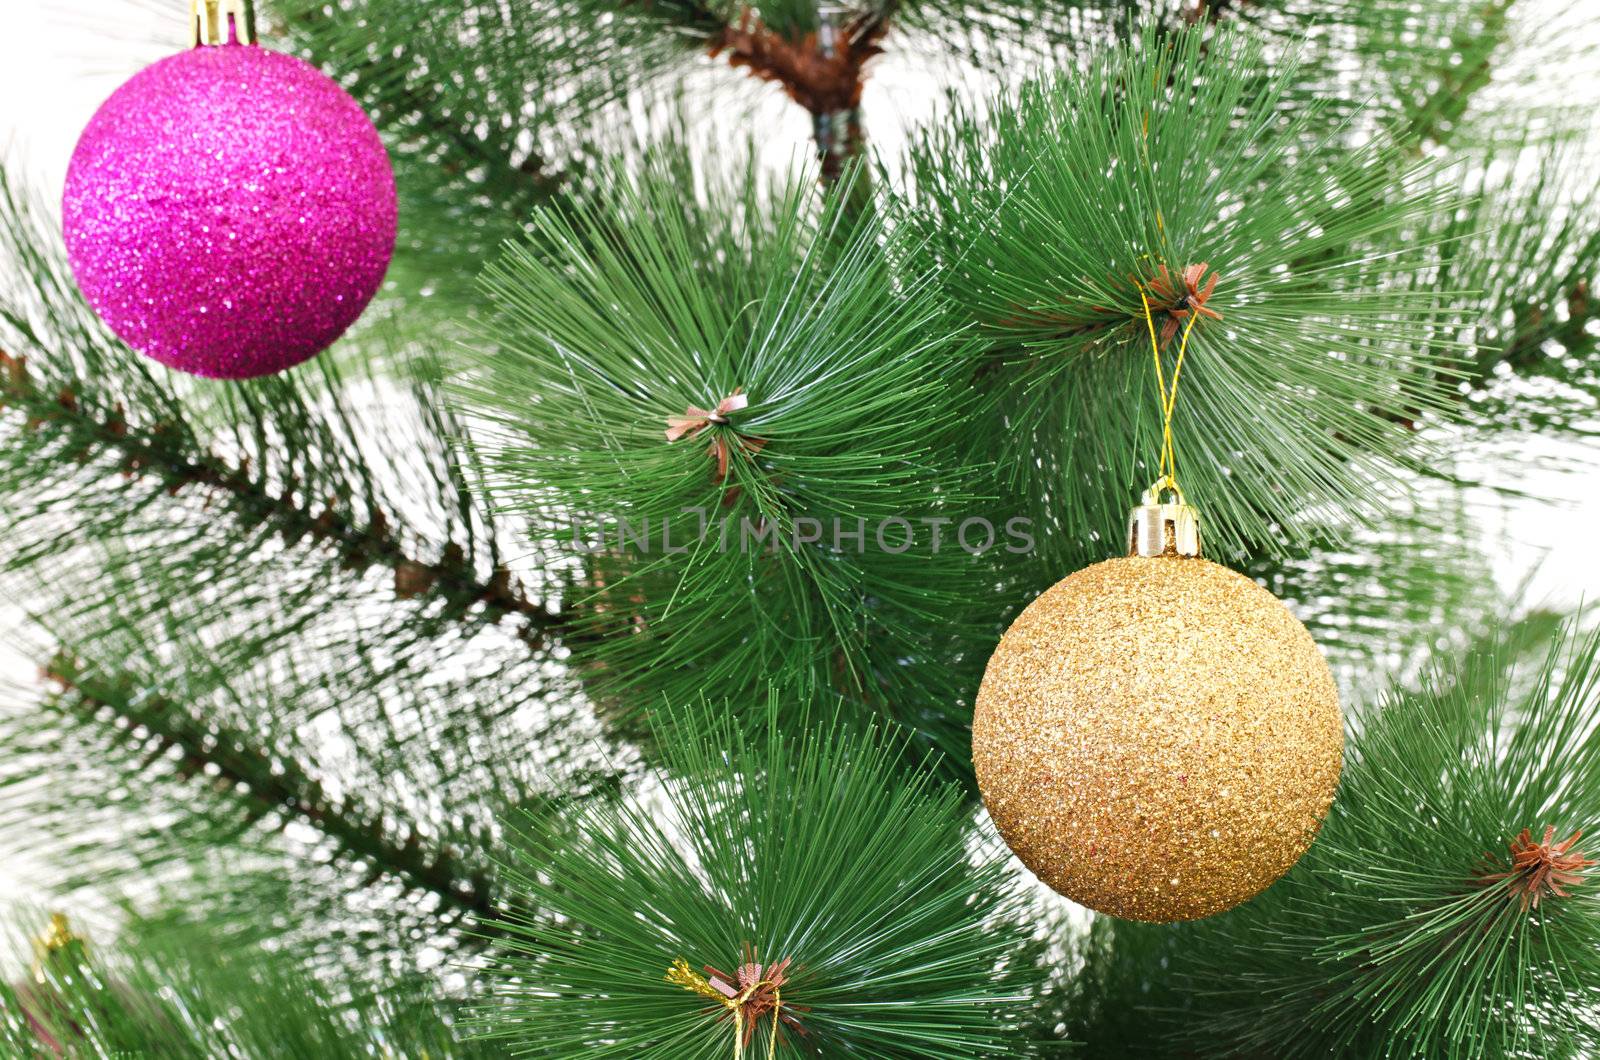 Christmas tree detail by milinz